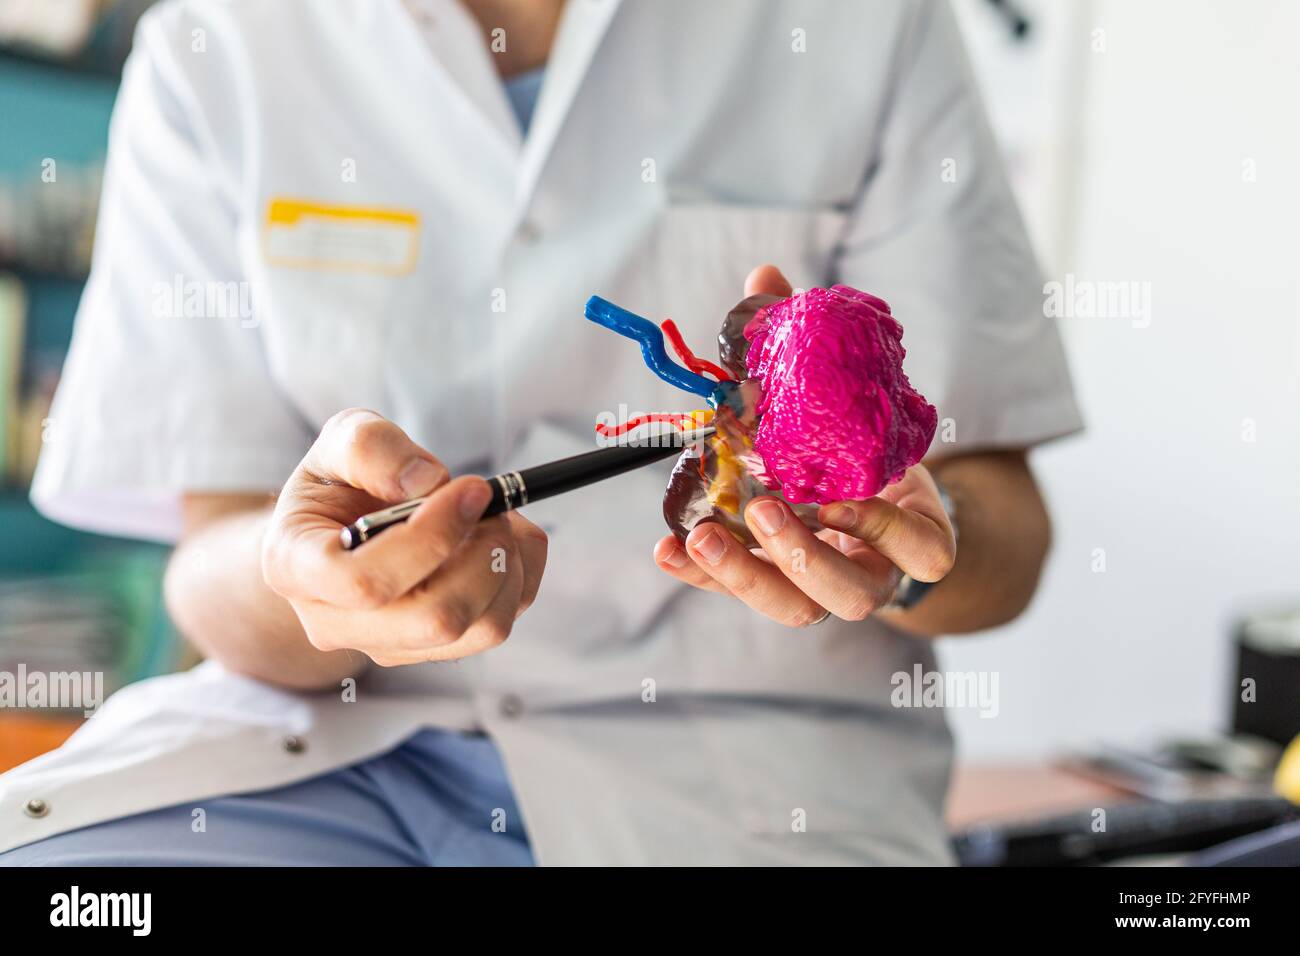 3D printed kidney model with tumor, 3D printing improves the preparation of the surgeon who thus visualizes the complexity of the case, It also allows Stock Photo